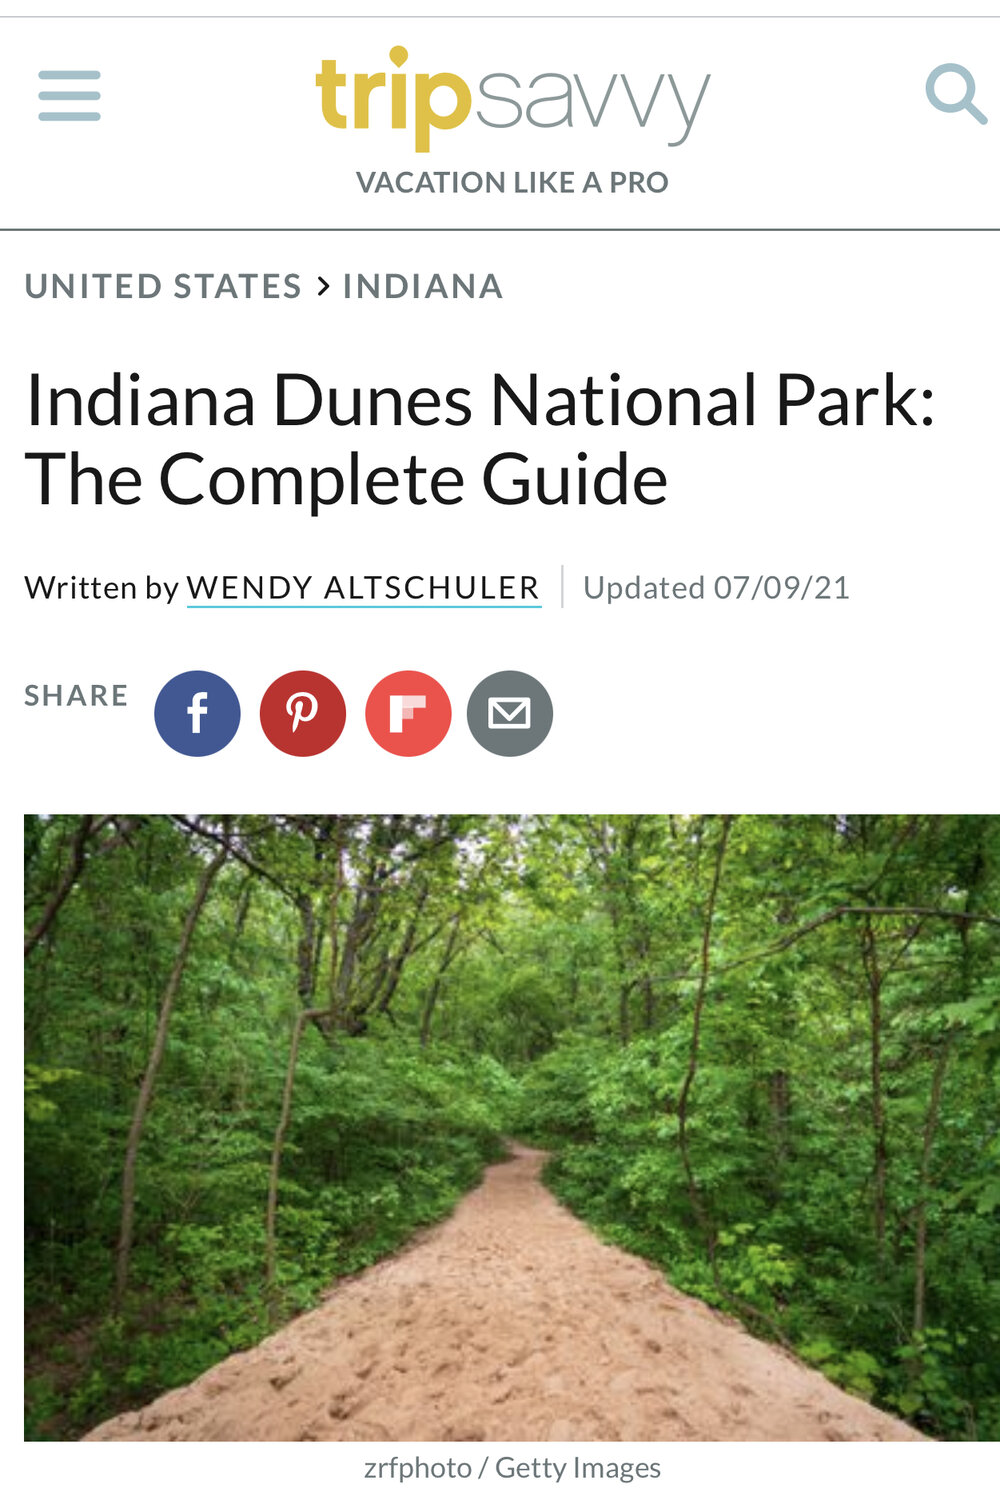 Indiana Dunes National Park: The Complete Guide